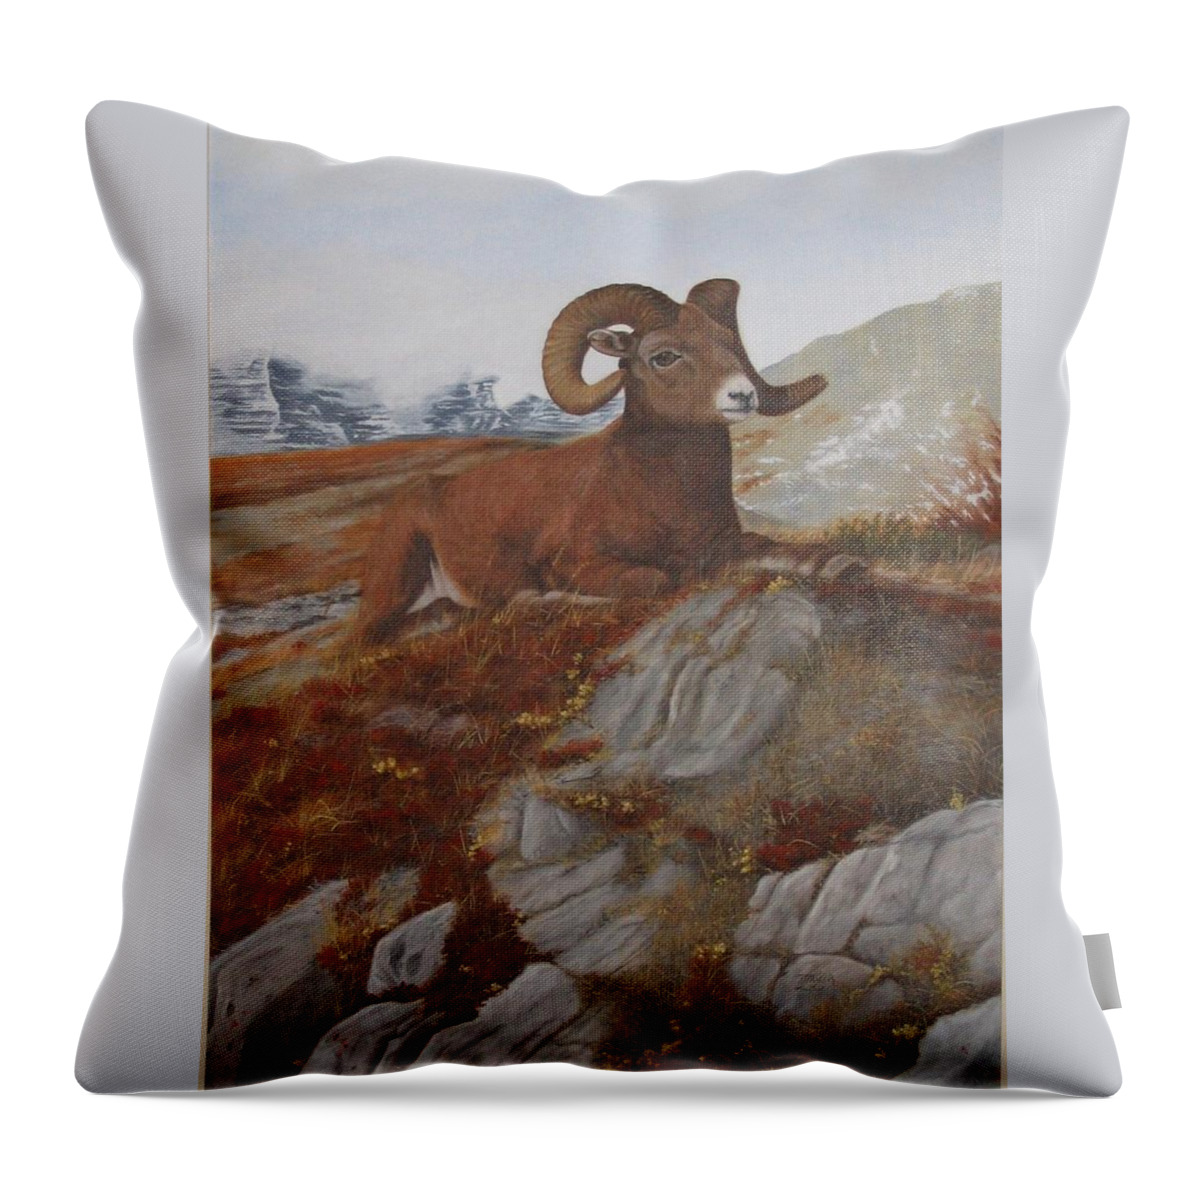 The High Throne Throw Pillow featuring the painting The High Throne by Tammy Taylor